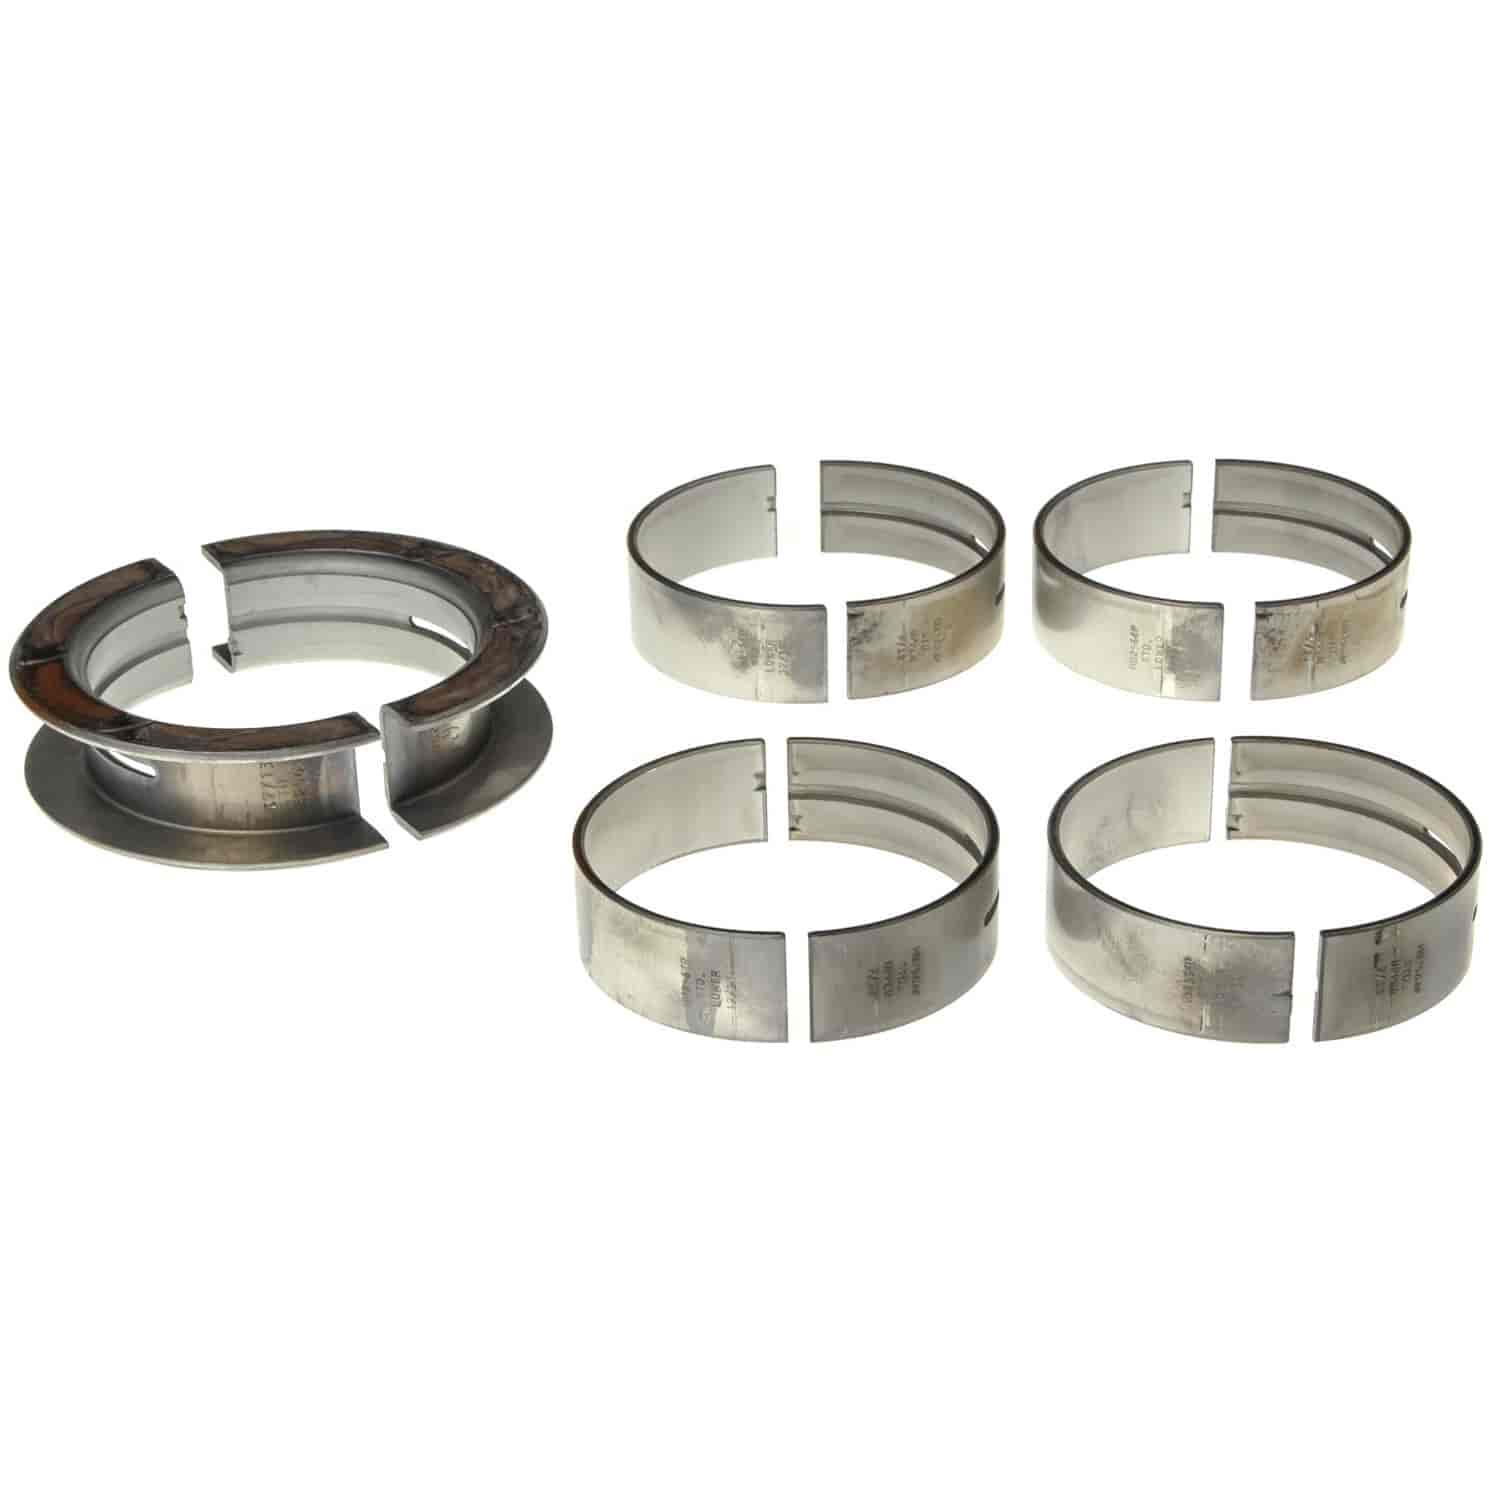 Main Bearing Set Ford 1968-1997 V8 370/429/460 (6.1/7.0/7.5L) with Standard Size